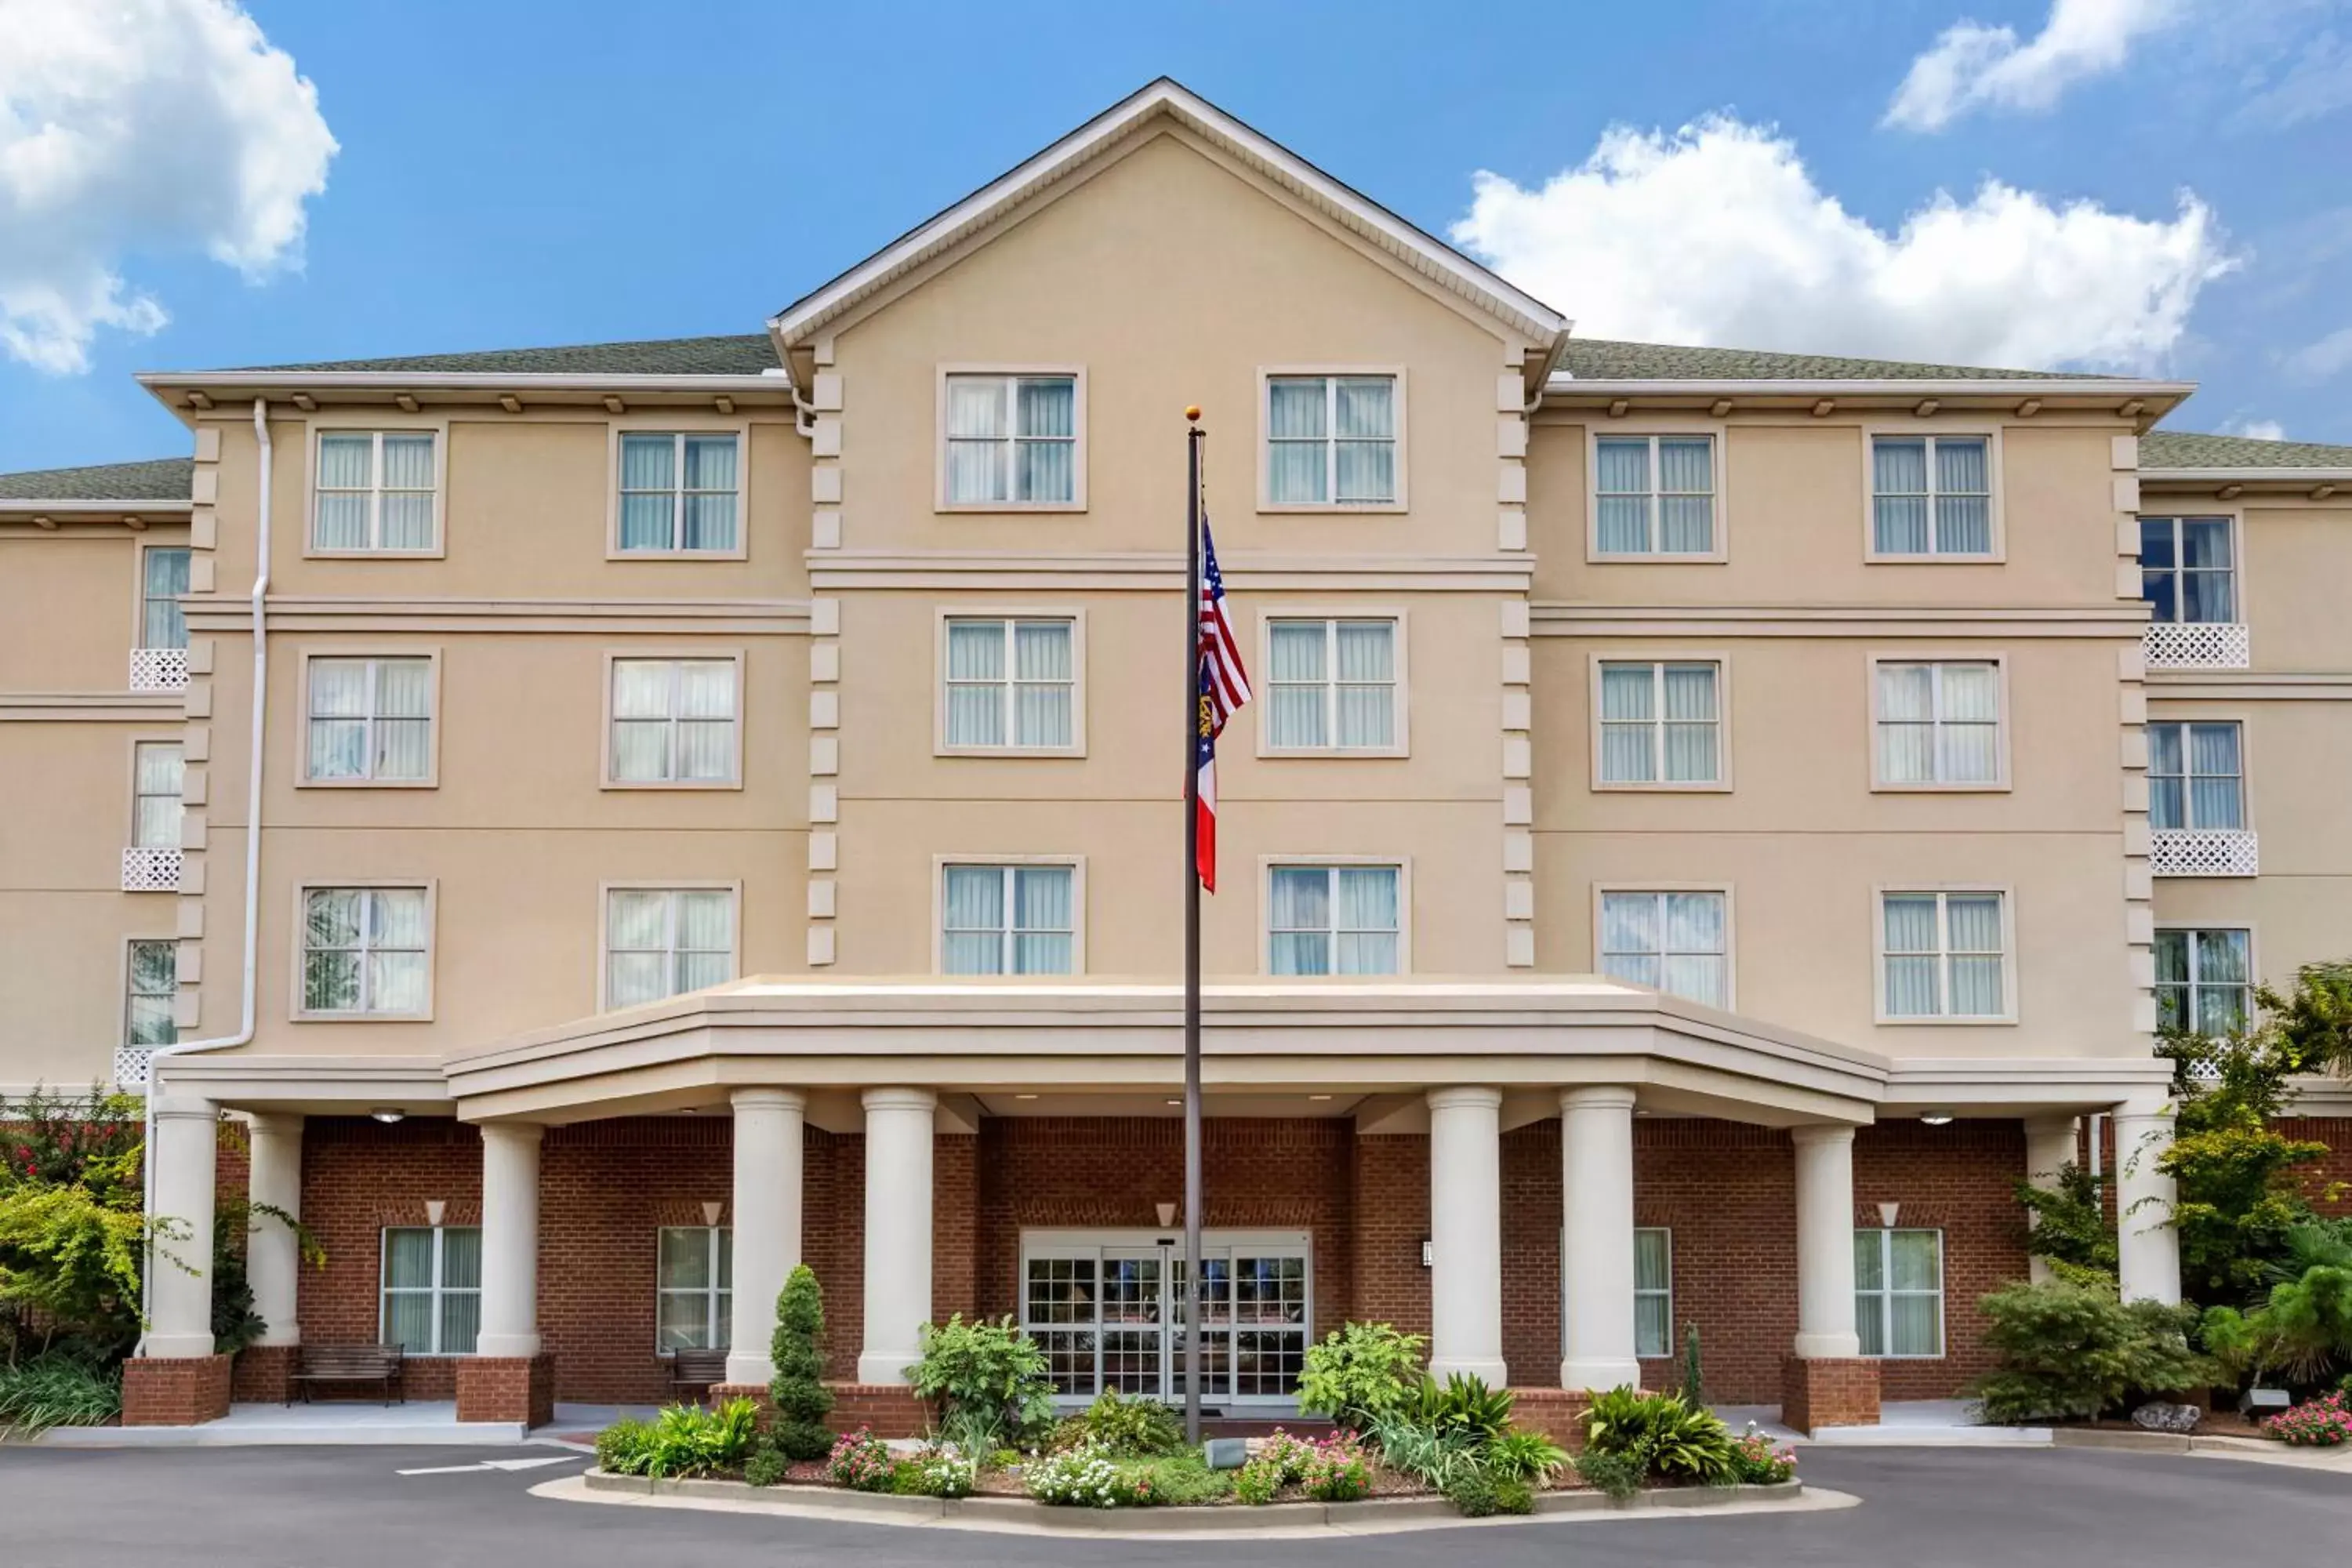 Property building, Facade/Entrance in Country Inn & Suites by Radisson, Athens, GA